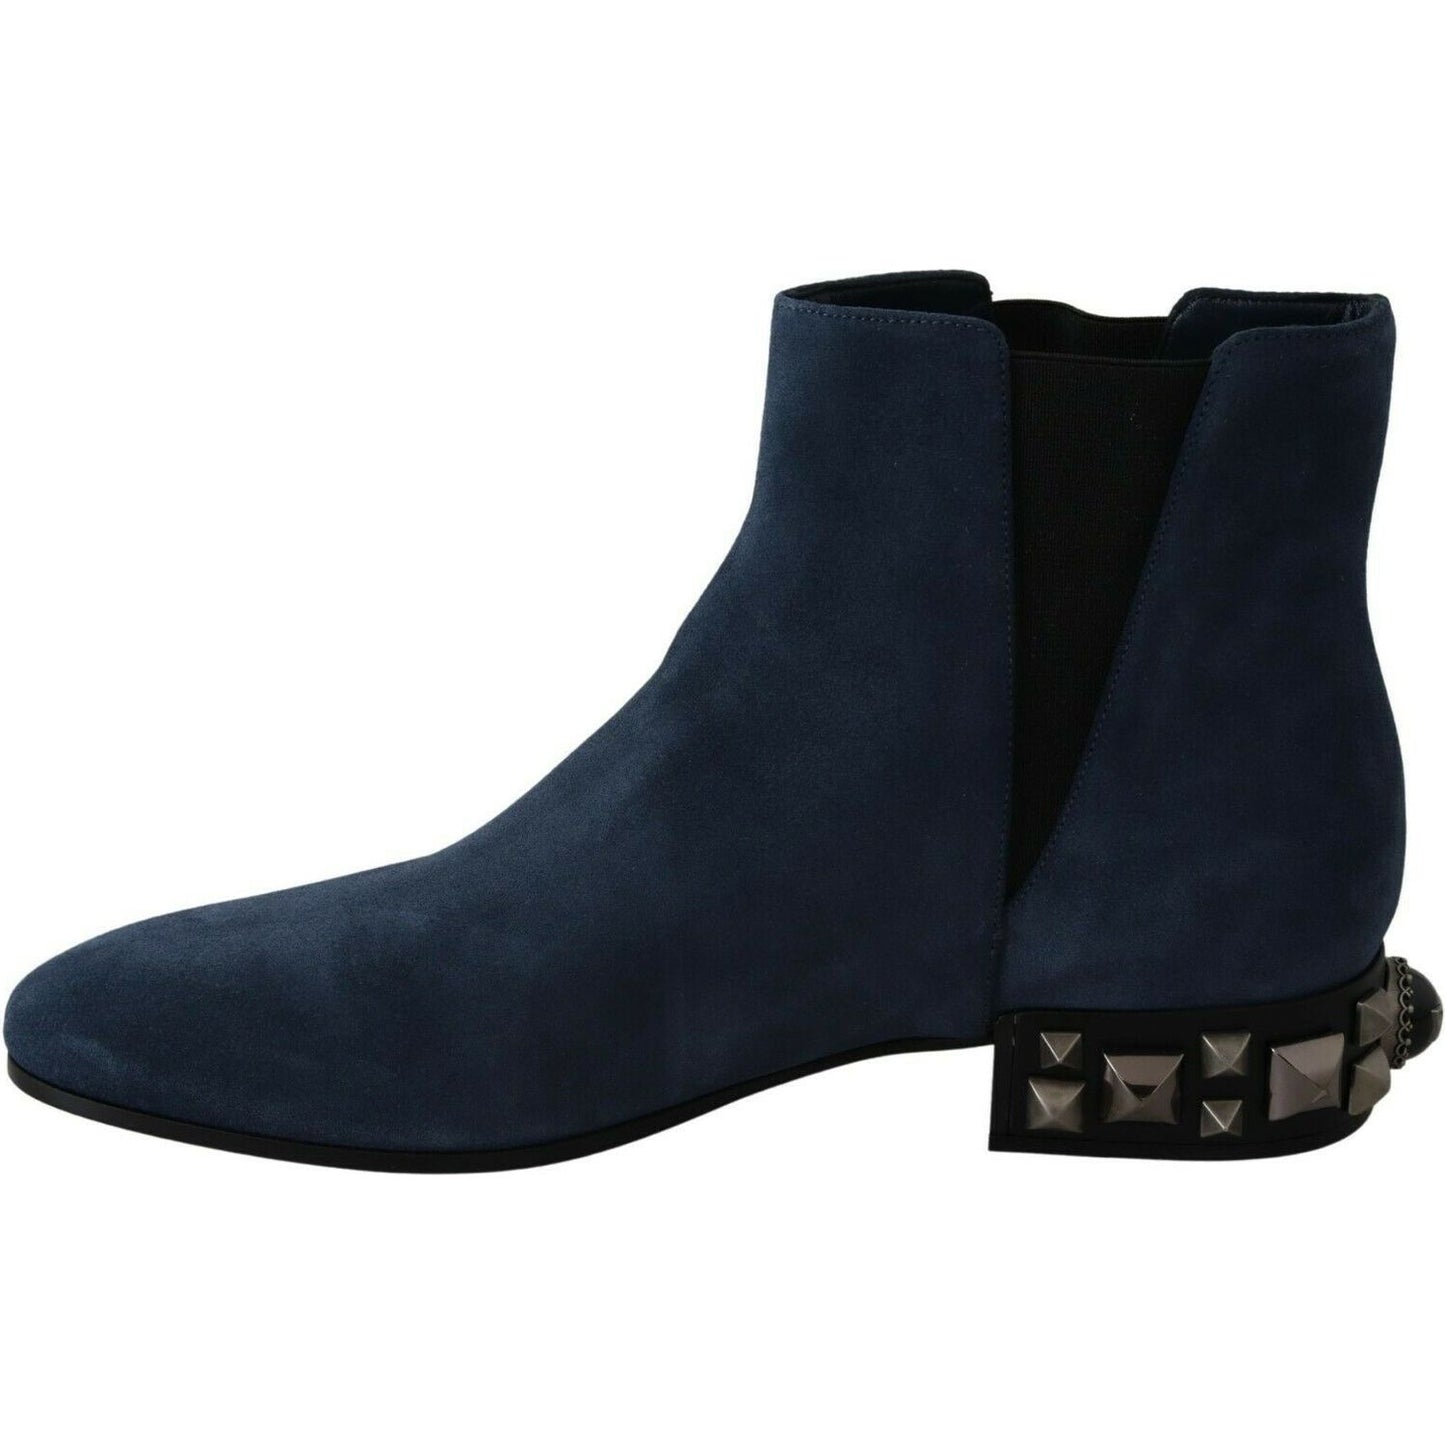 Dolce & Gabbana Chic Blue Suede Mid-Calf Boots with Stud Details blue-suede-embellished-studded-boots-shoes WOMAN BOOTS s-l1600-2022-06-30T120557.424-00628cf7-ef5.jpg